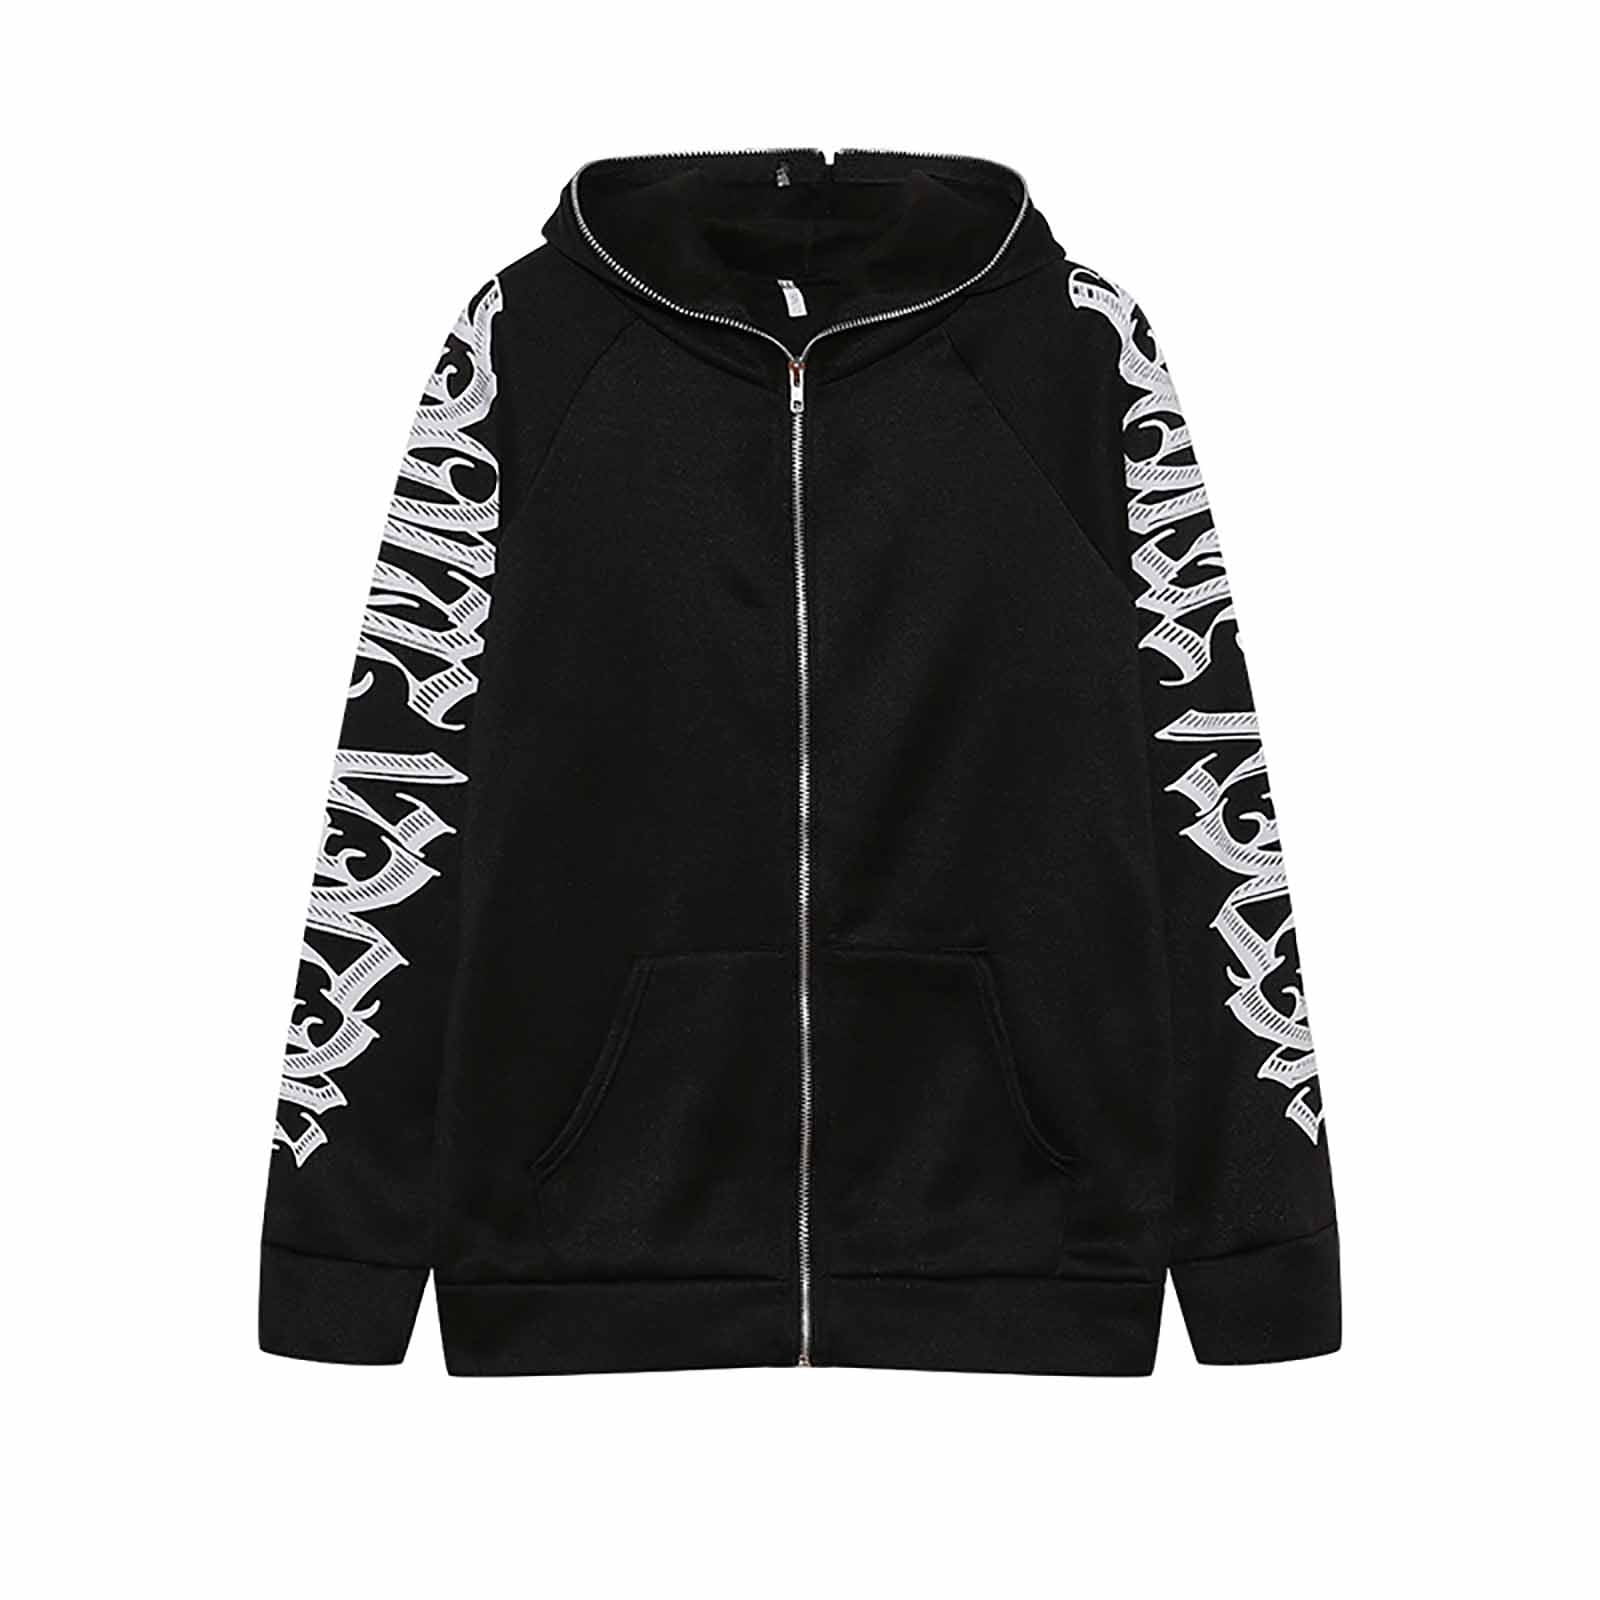 Jacket Makers Women's Chrome Hearts Zip Up Cropped Hoodie